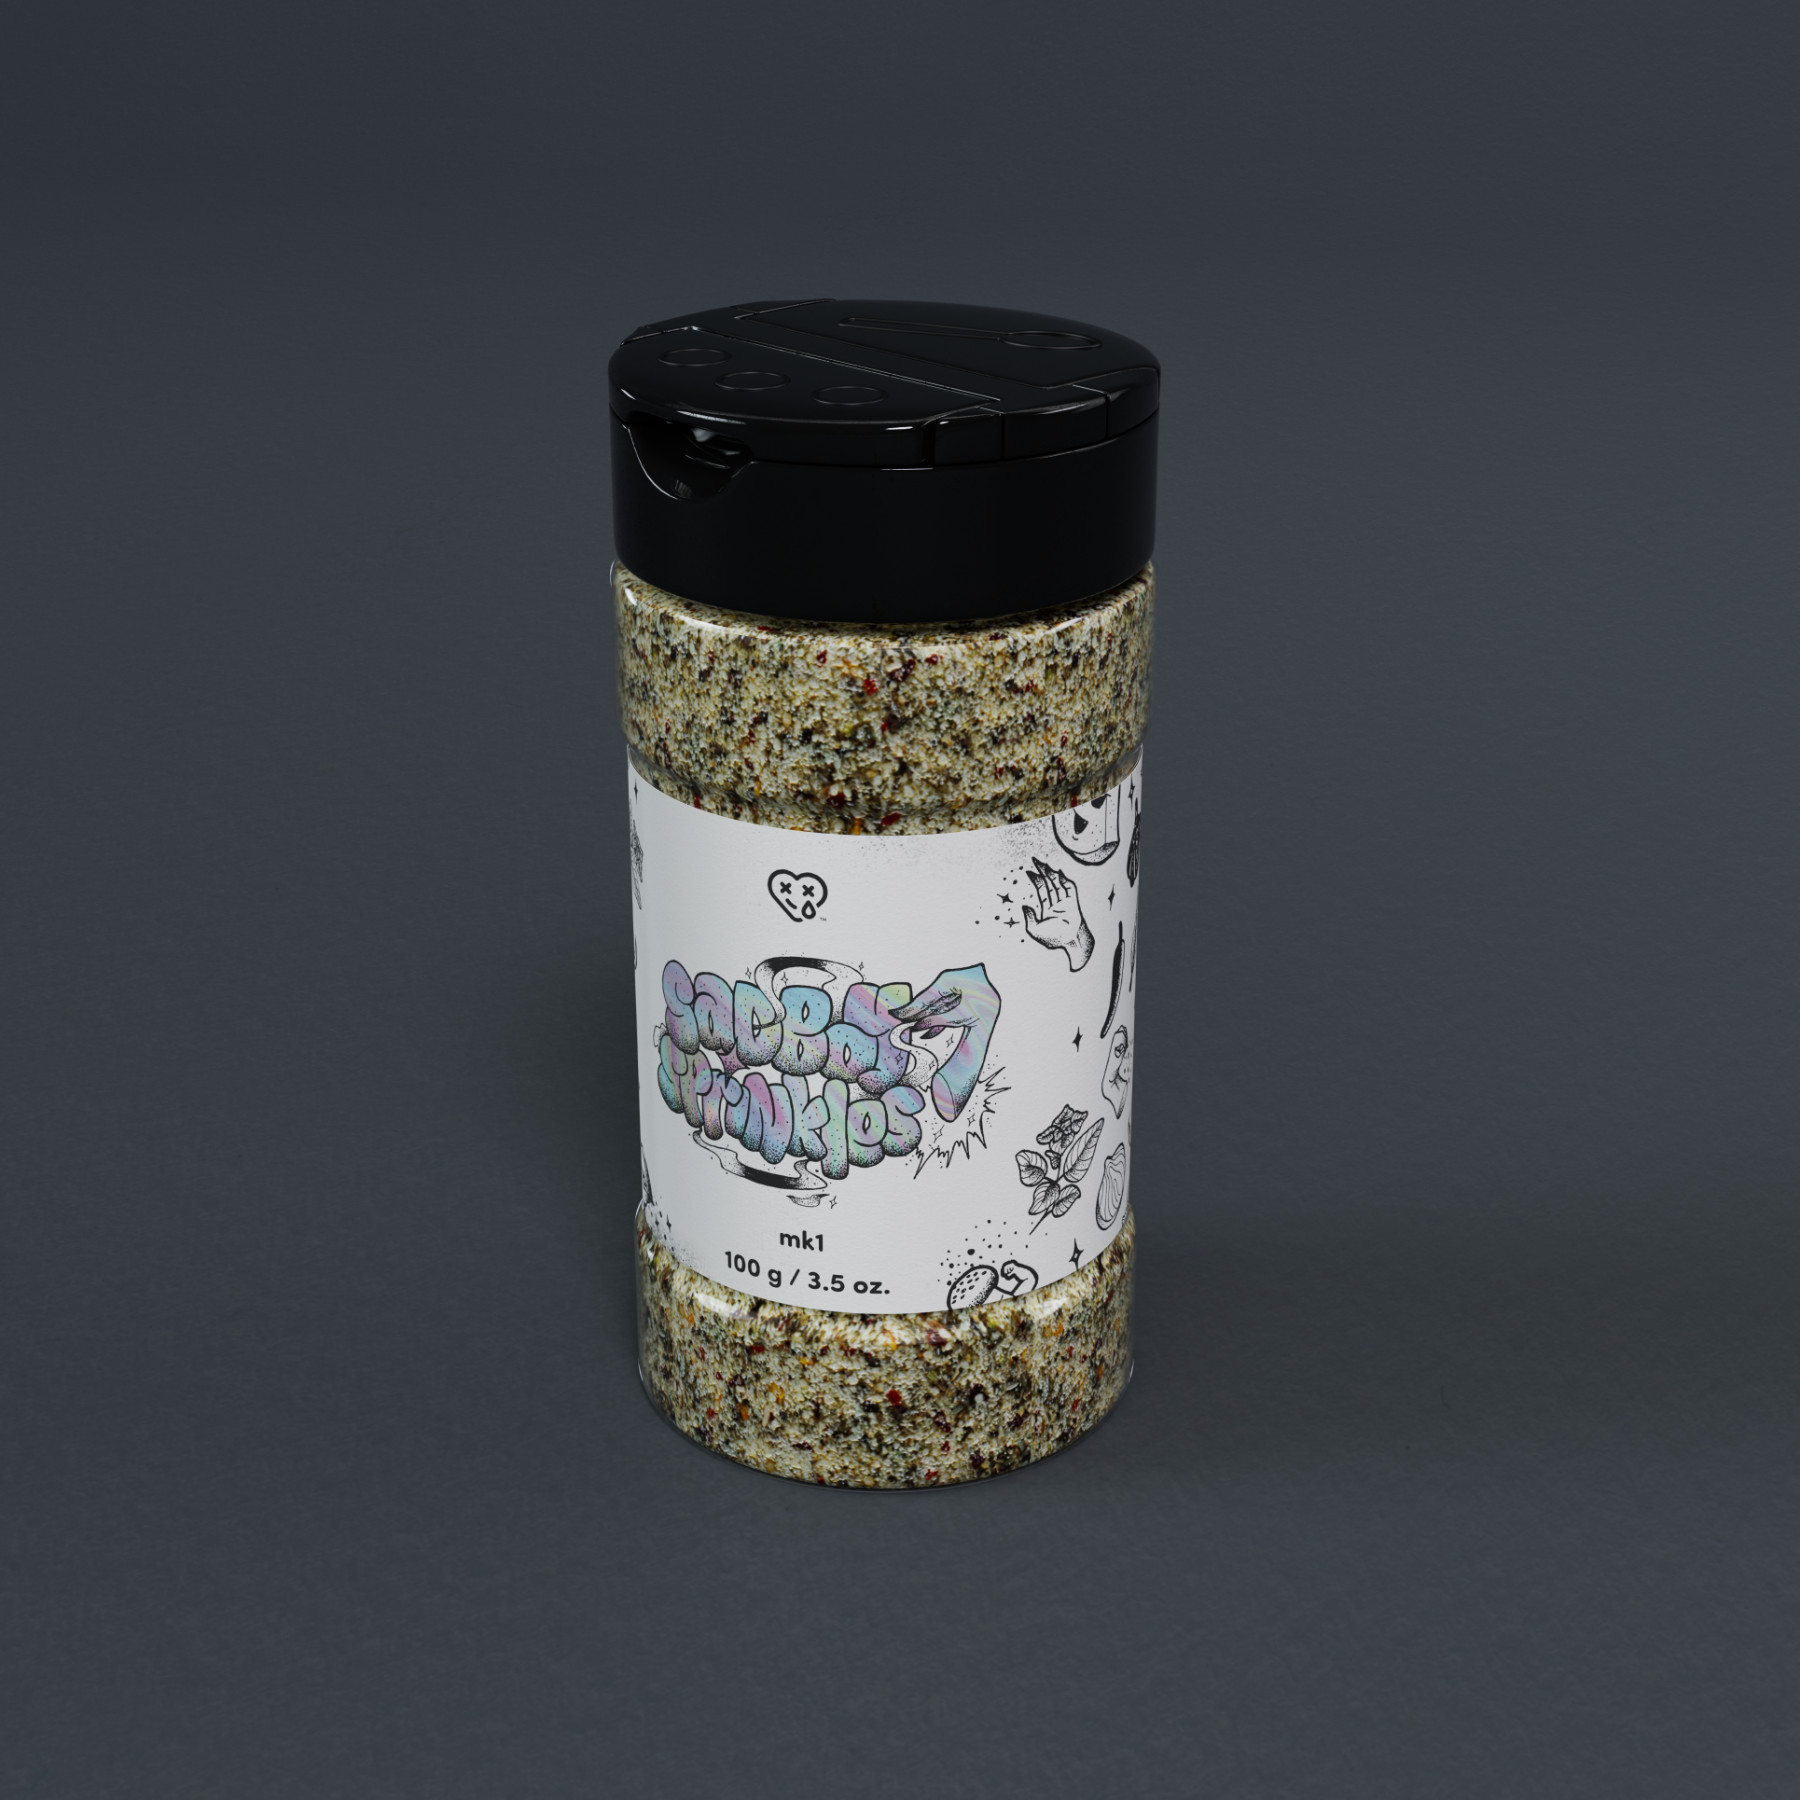 sadbpy pizza spices 3D product visualistion